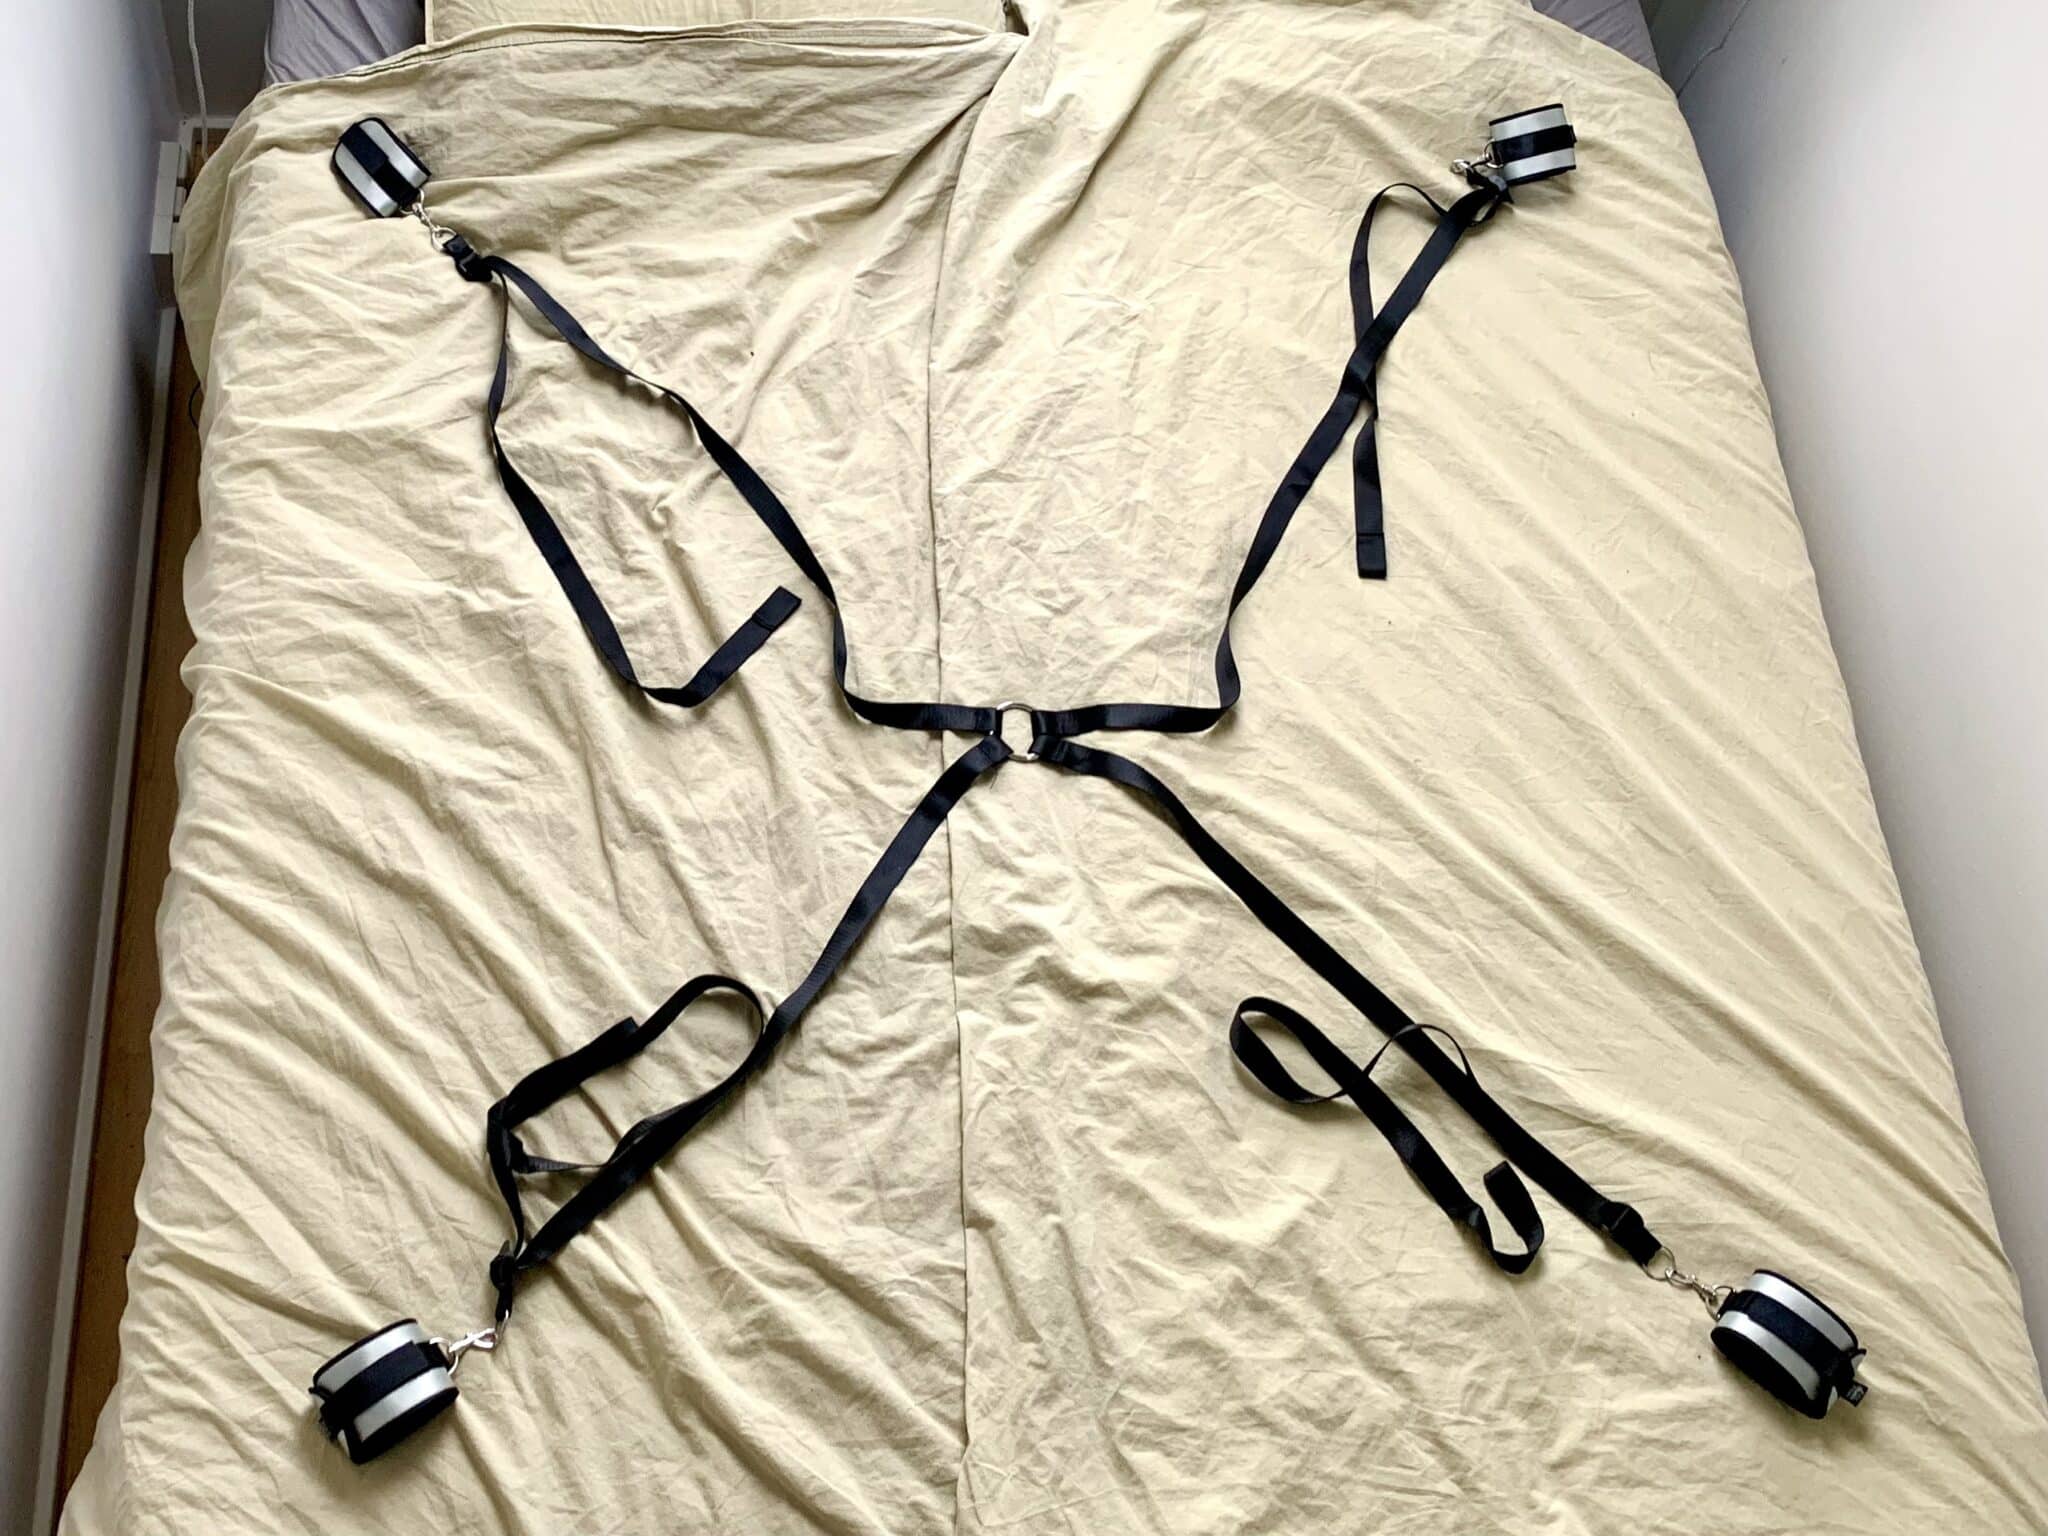 Fifty Shades of Grey Hard Limits Bed Restraint Kit My User Experience